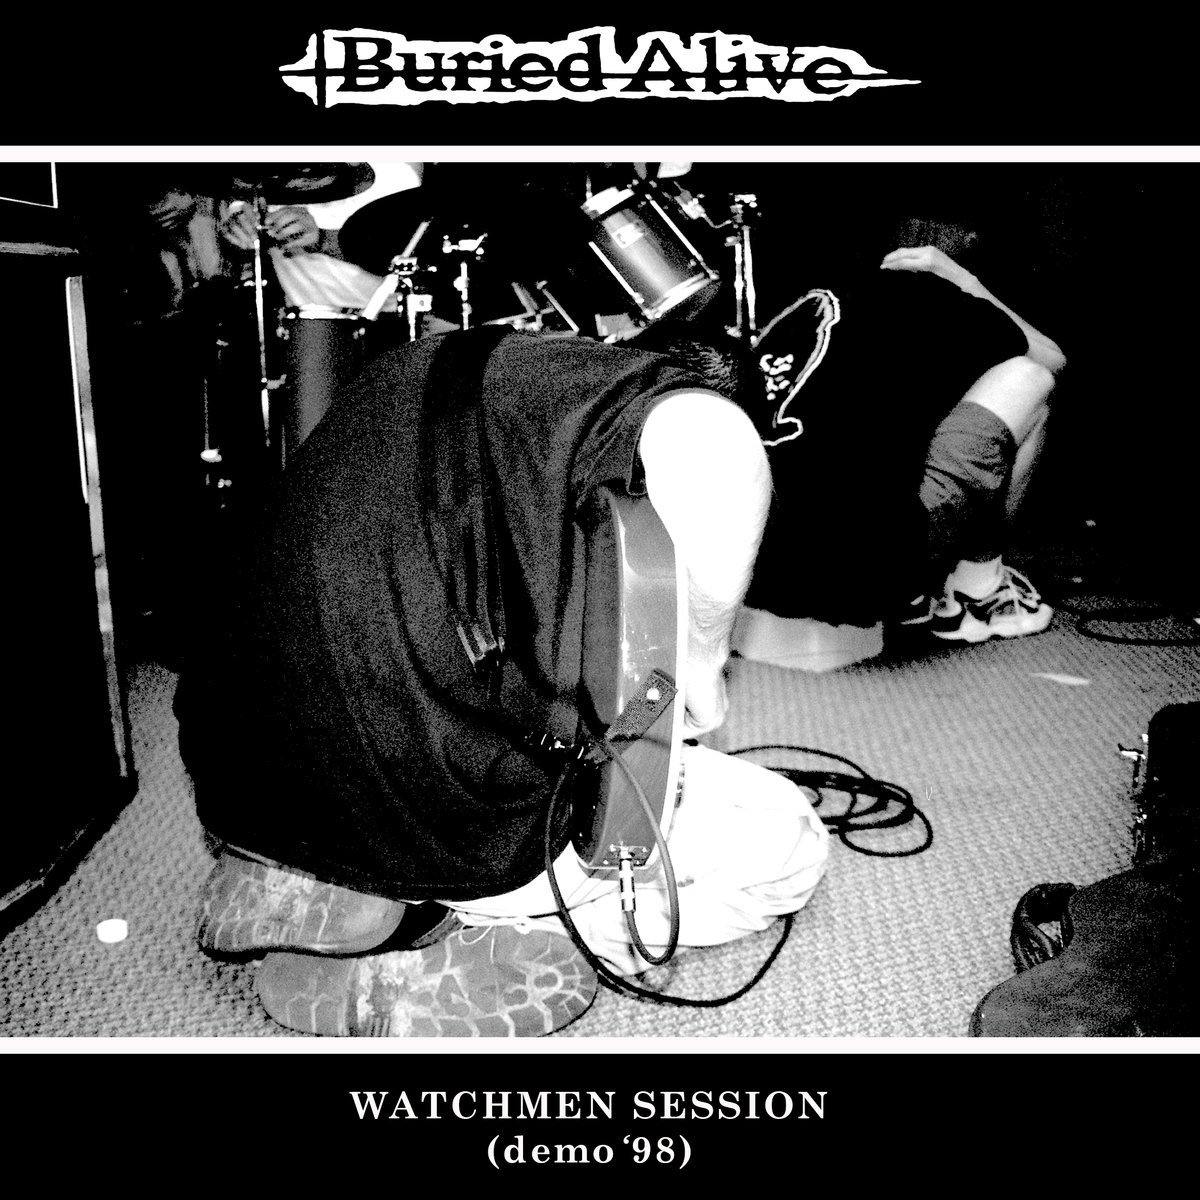 Buy – Buried Alive "Watchmen Sessions" 7" – Band & Music Merch – Cold Cuts Merch